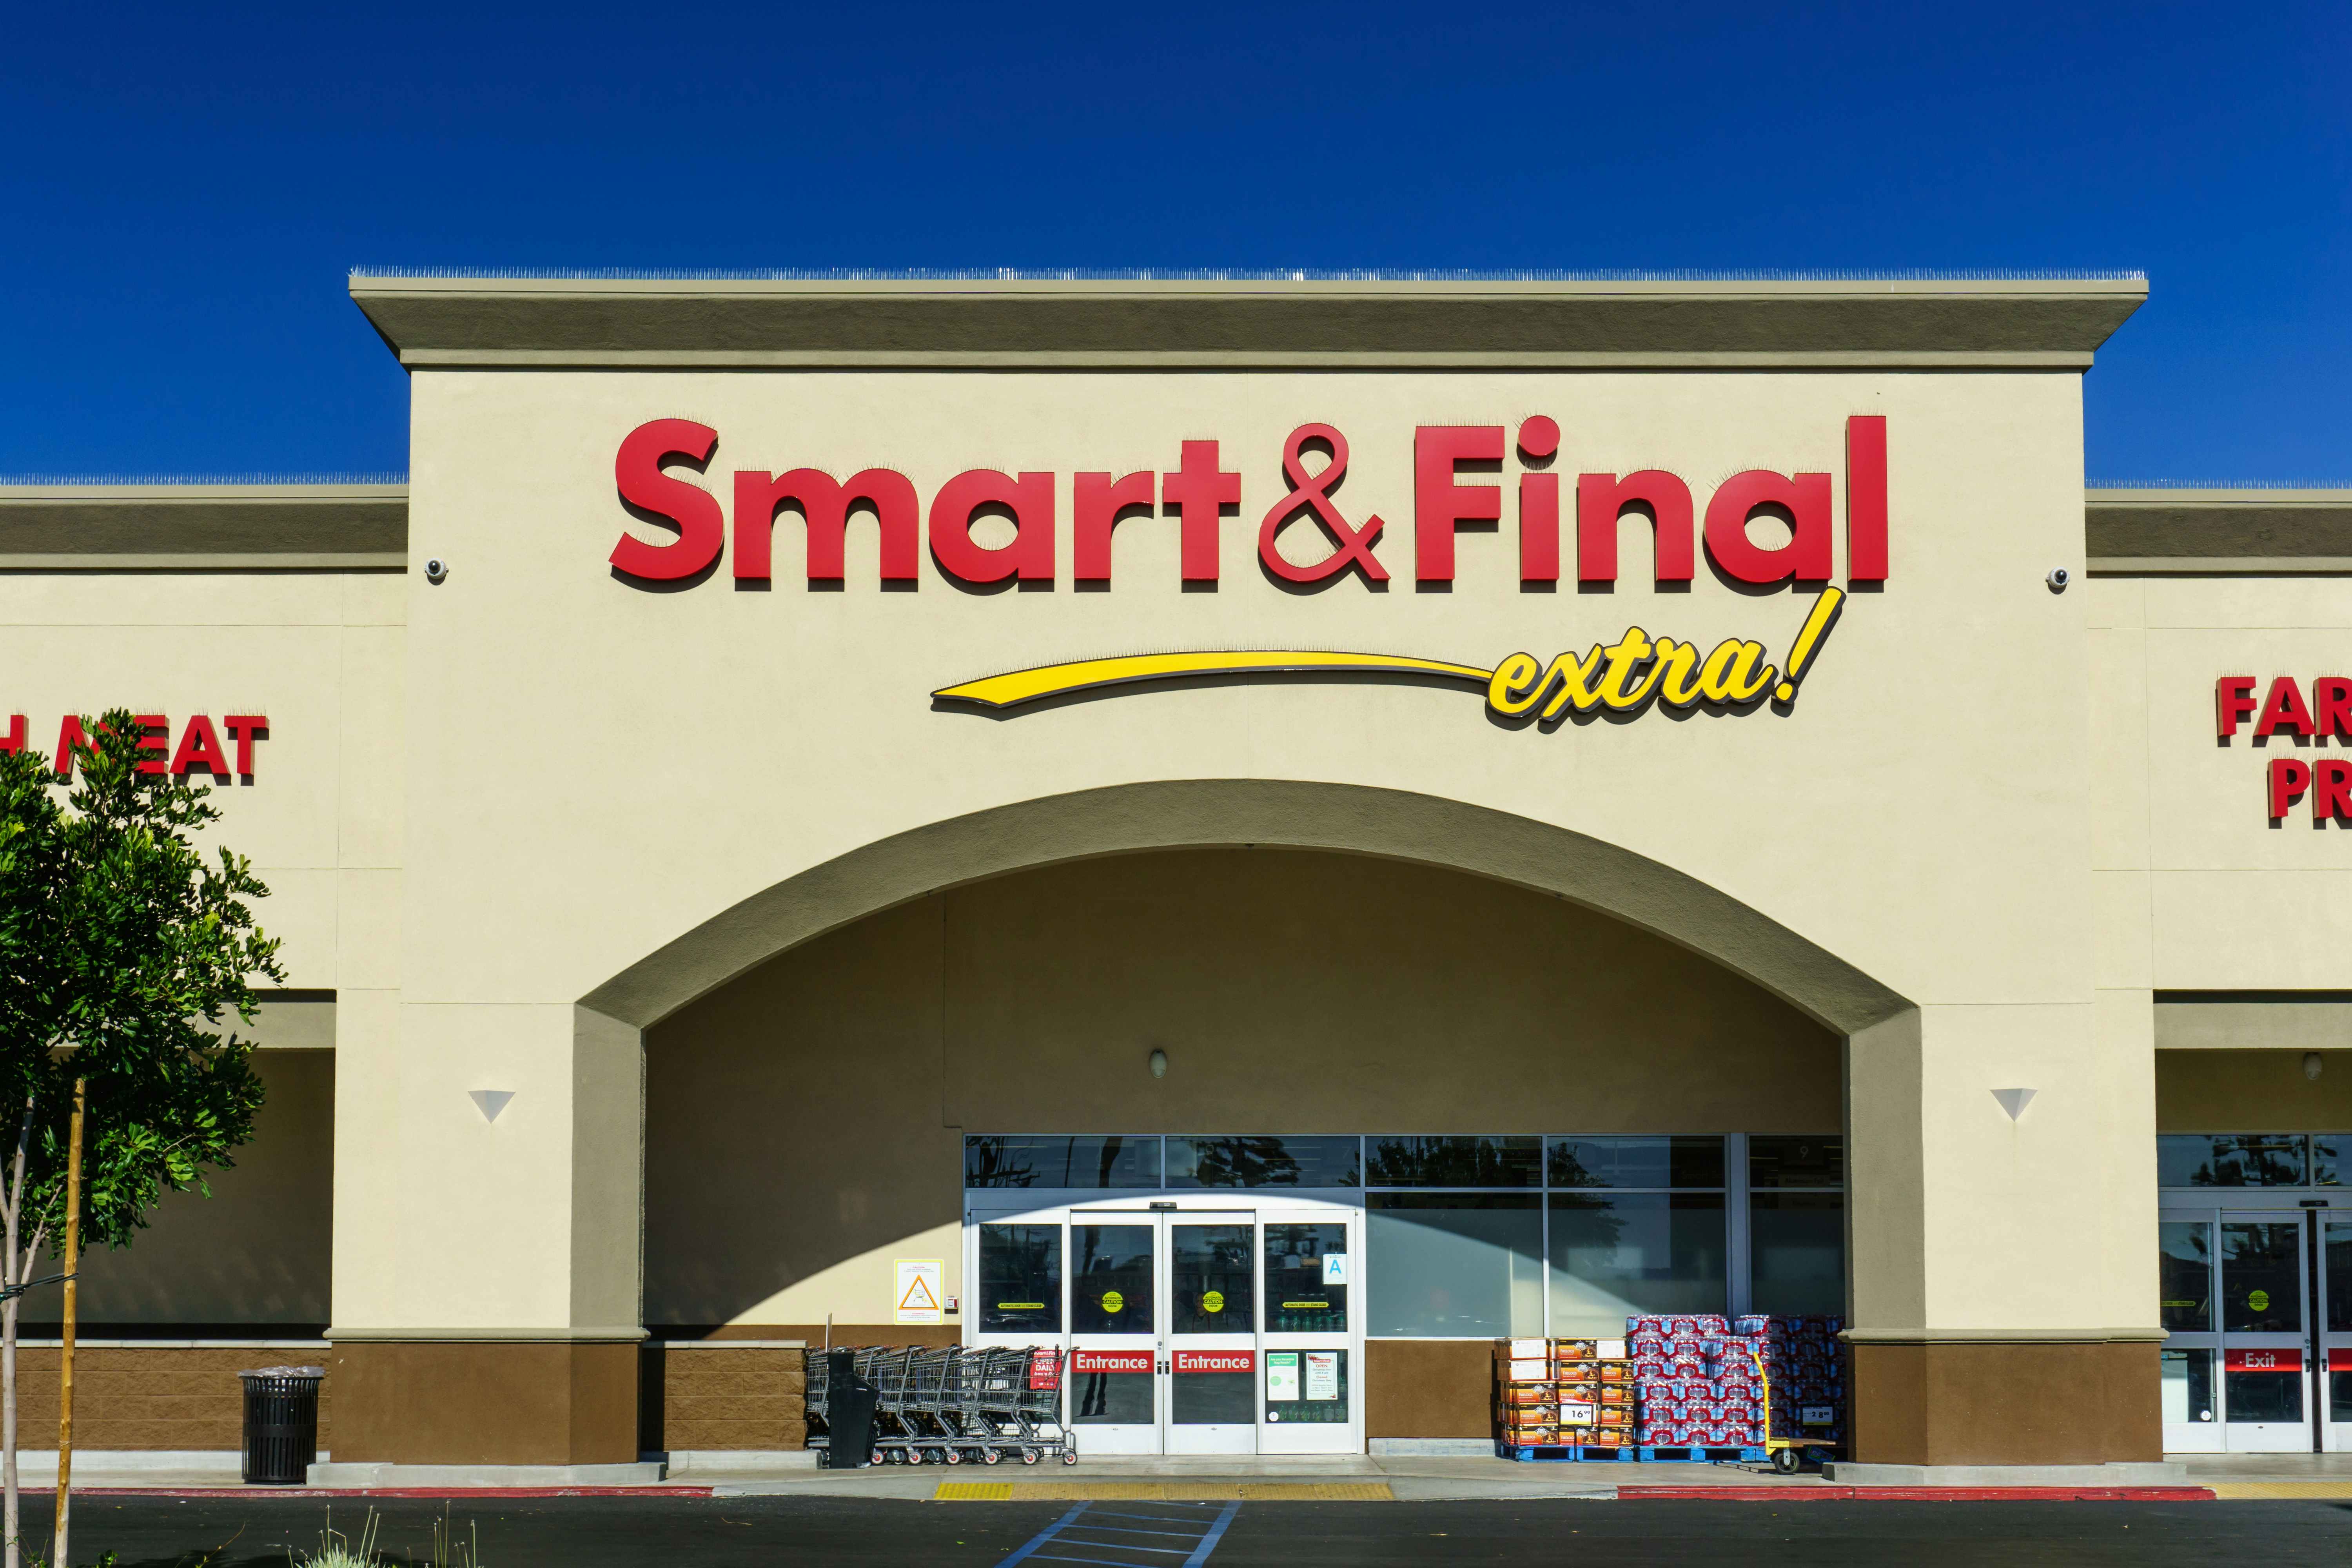 Smart & Final extra store front.